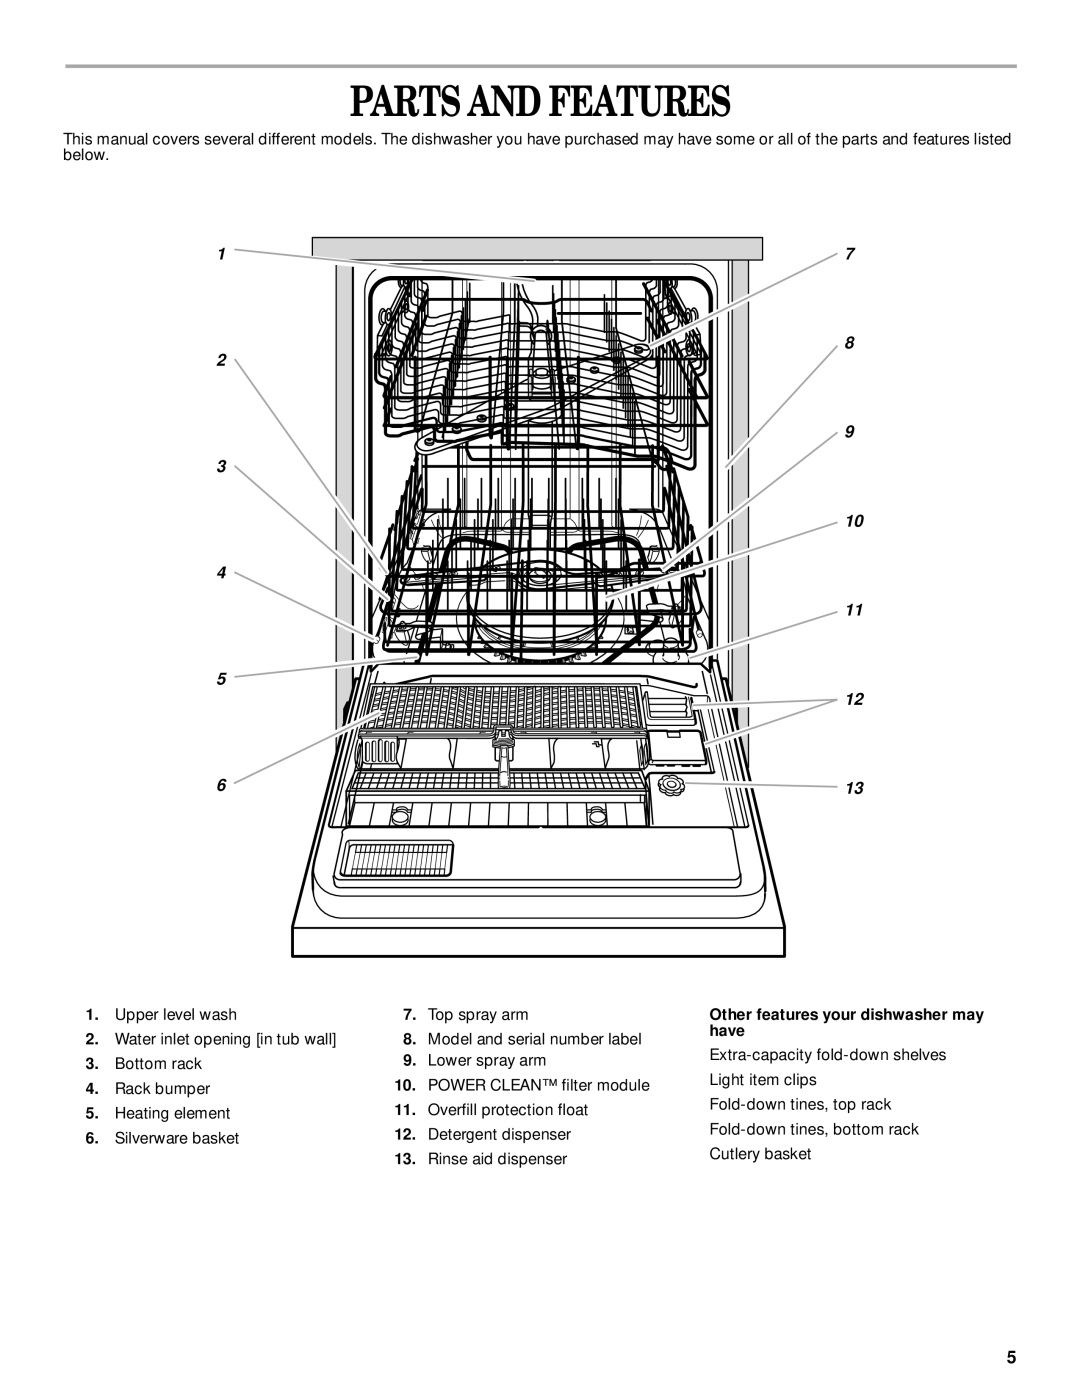 Whirlpool 1000, 931 manual Parts And Features, Other features your dishwasher may have 